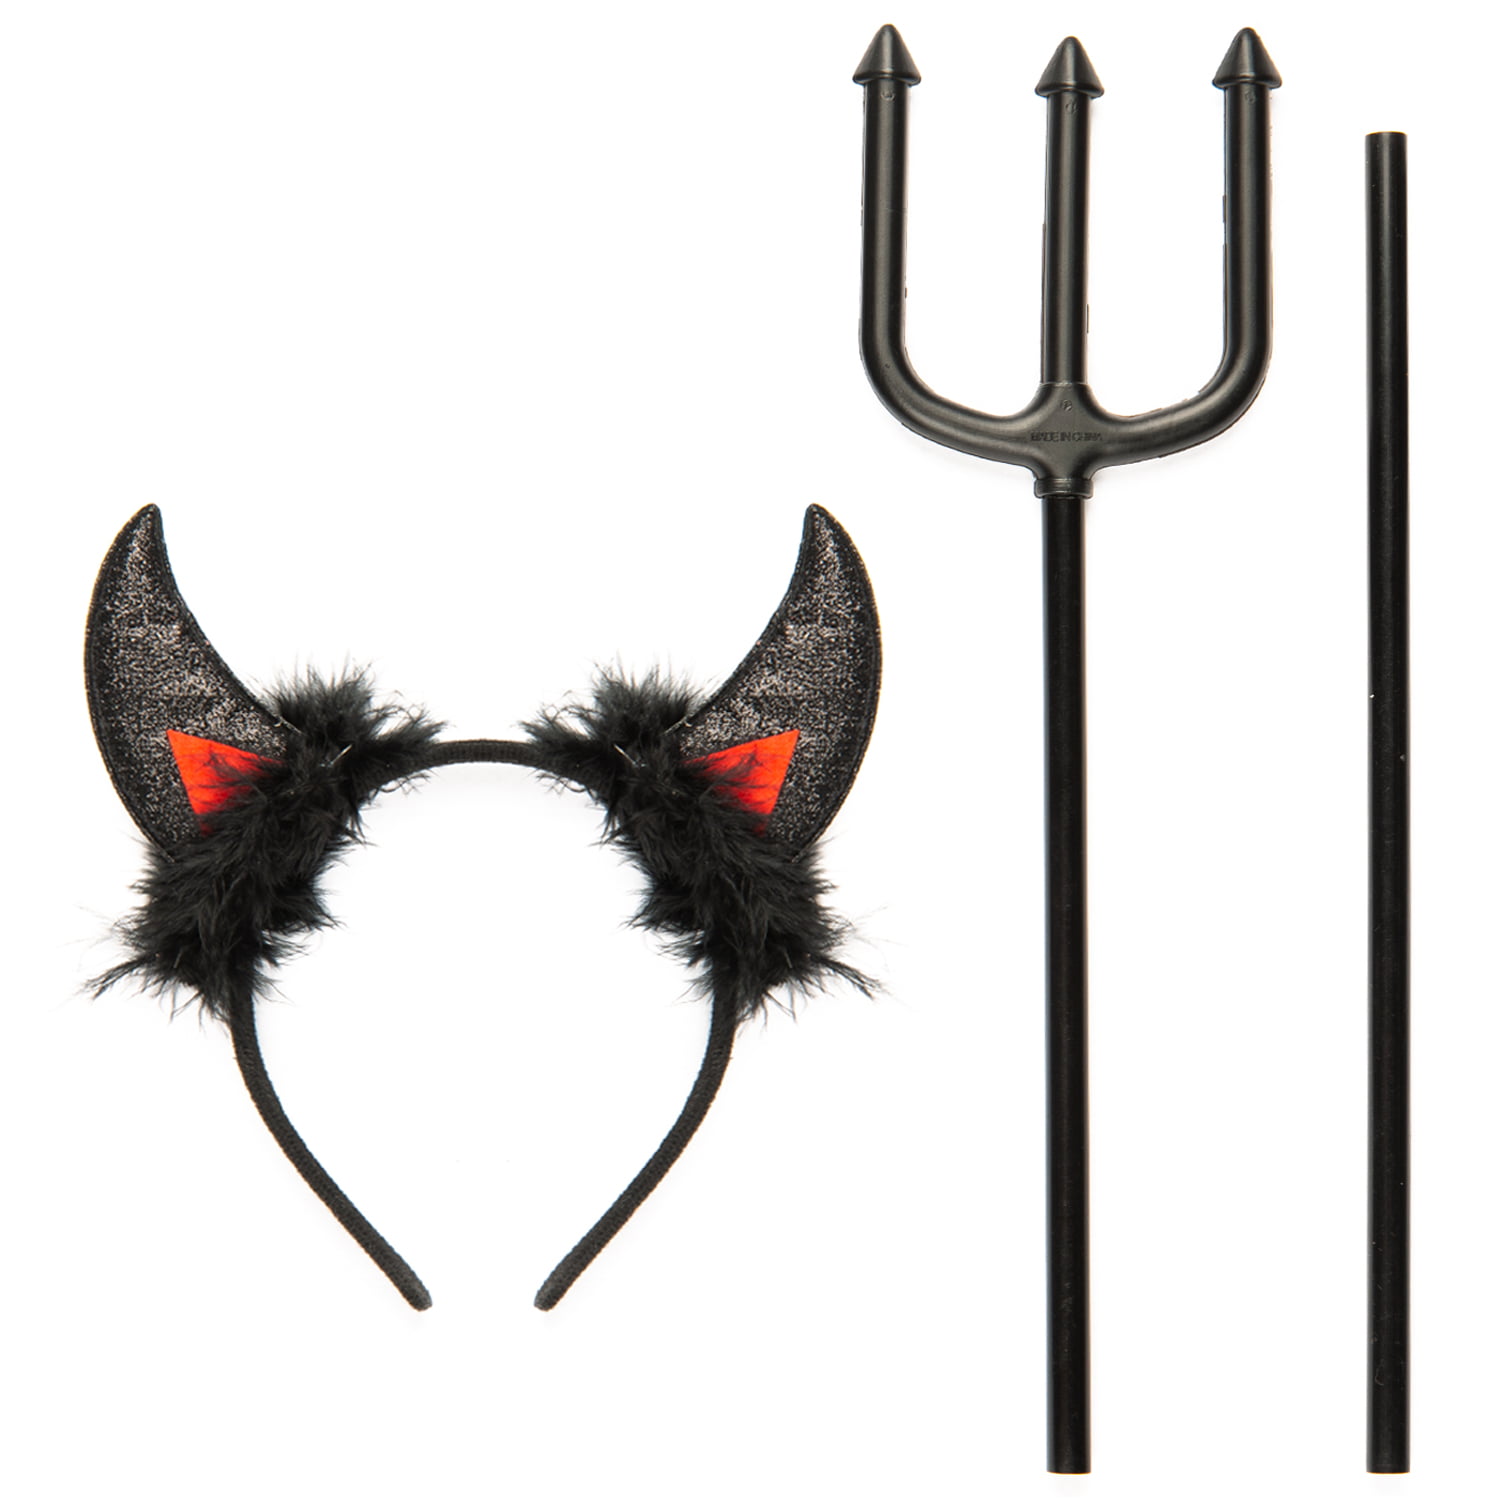 FUNCREDIBLE Devil Horns And Pitchfork | Devil Costume Accessories | Glitter Devil Headband | Halloween Fancy Cosplay Outfit Accessories for Women, Men and Kids (Black) - Walmart.com